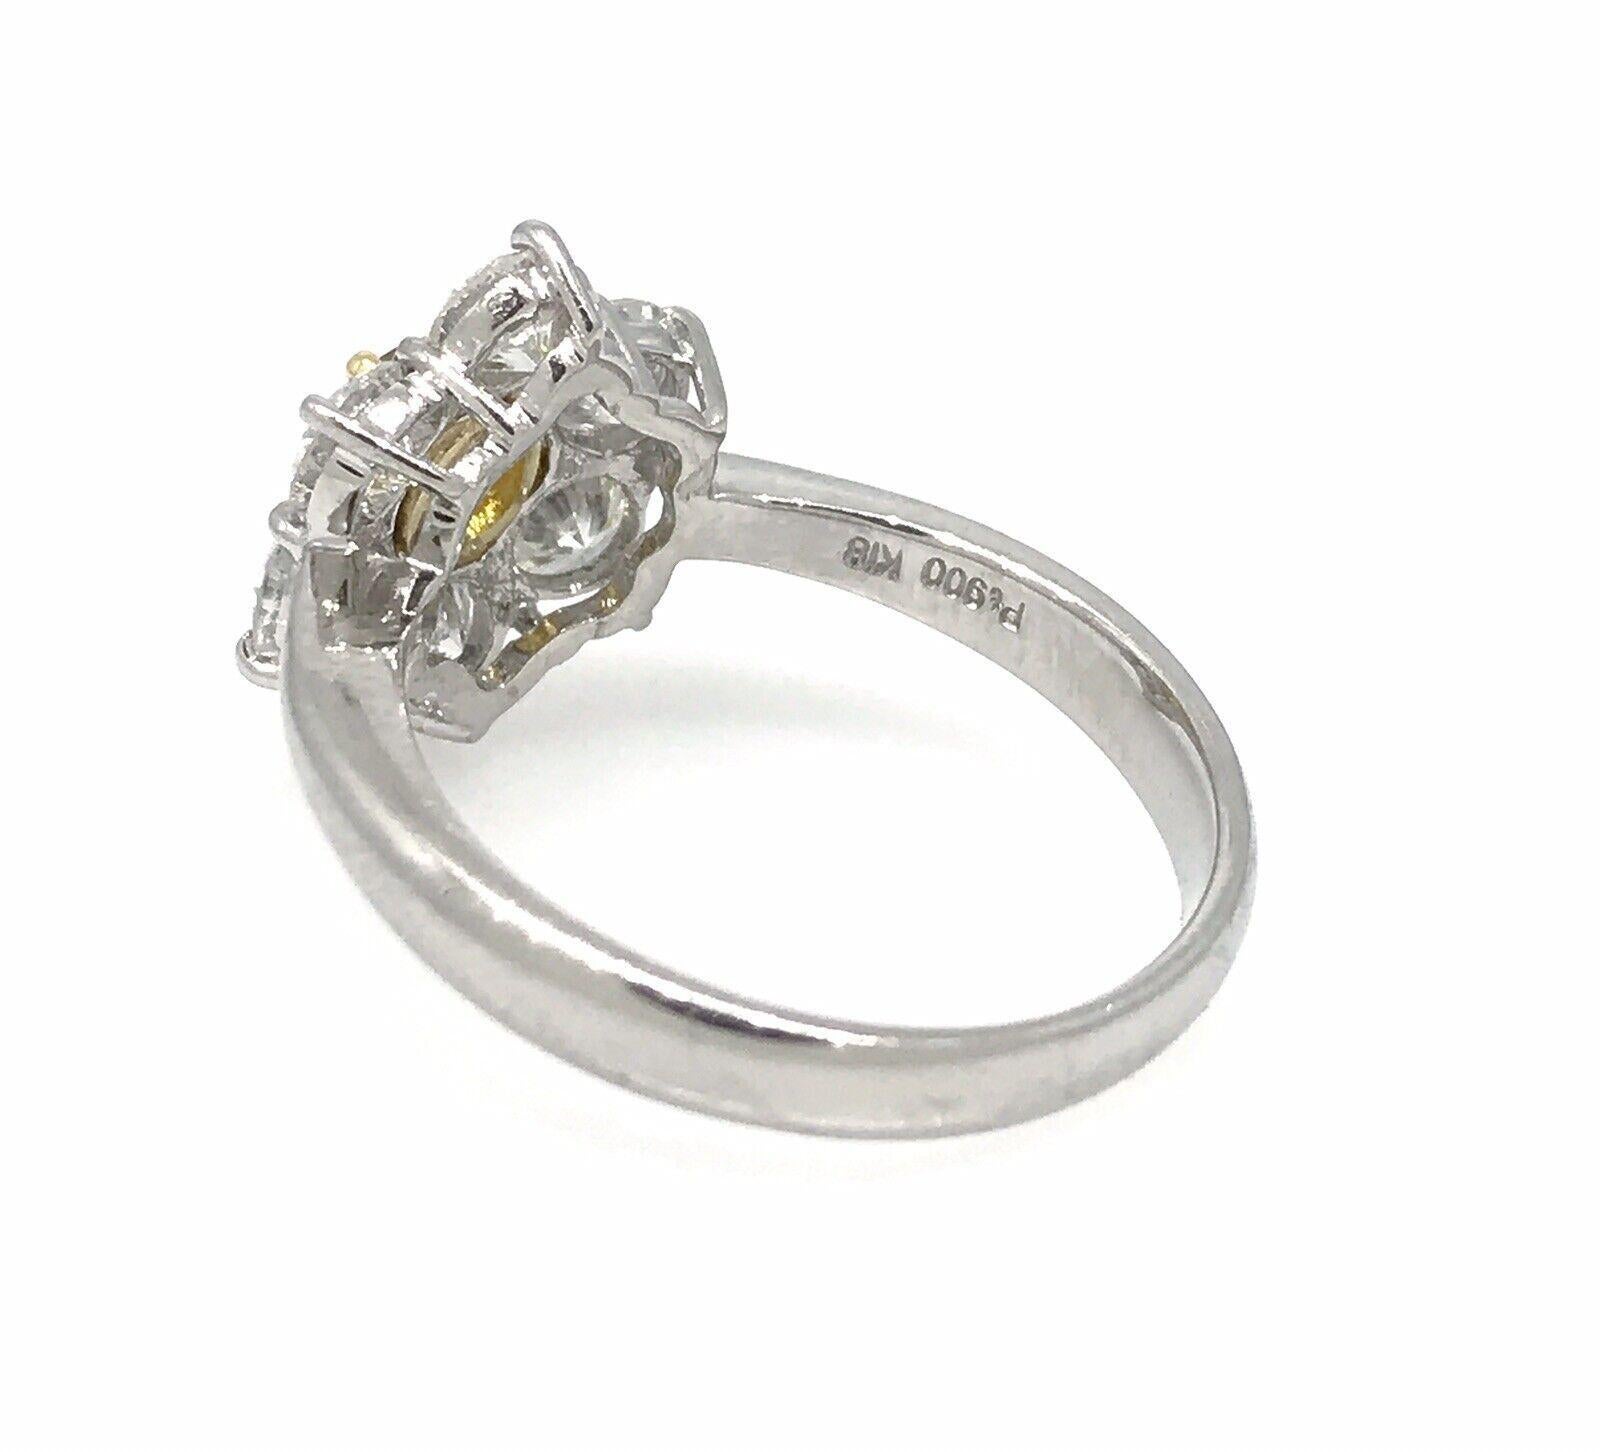 Women's GIA Fancy Intense Yellow Diamond Floret Ring in Platinum and 18k Gold For Sale